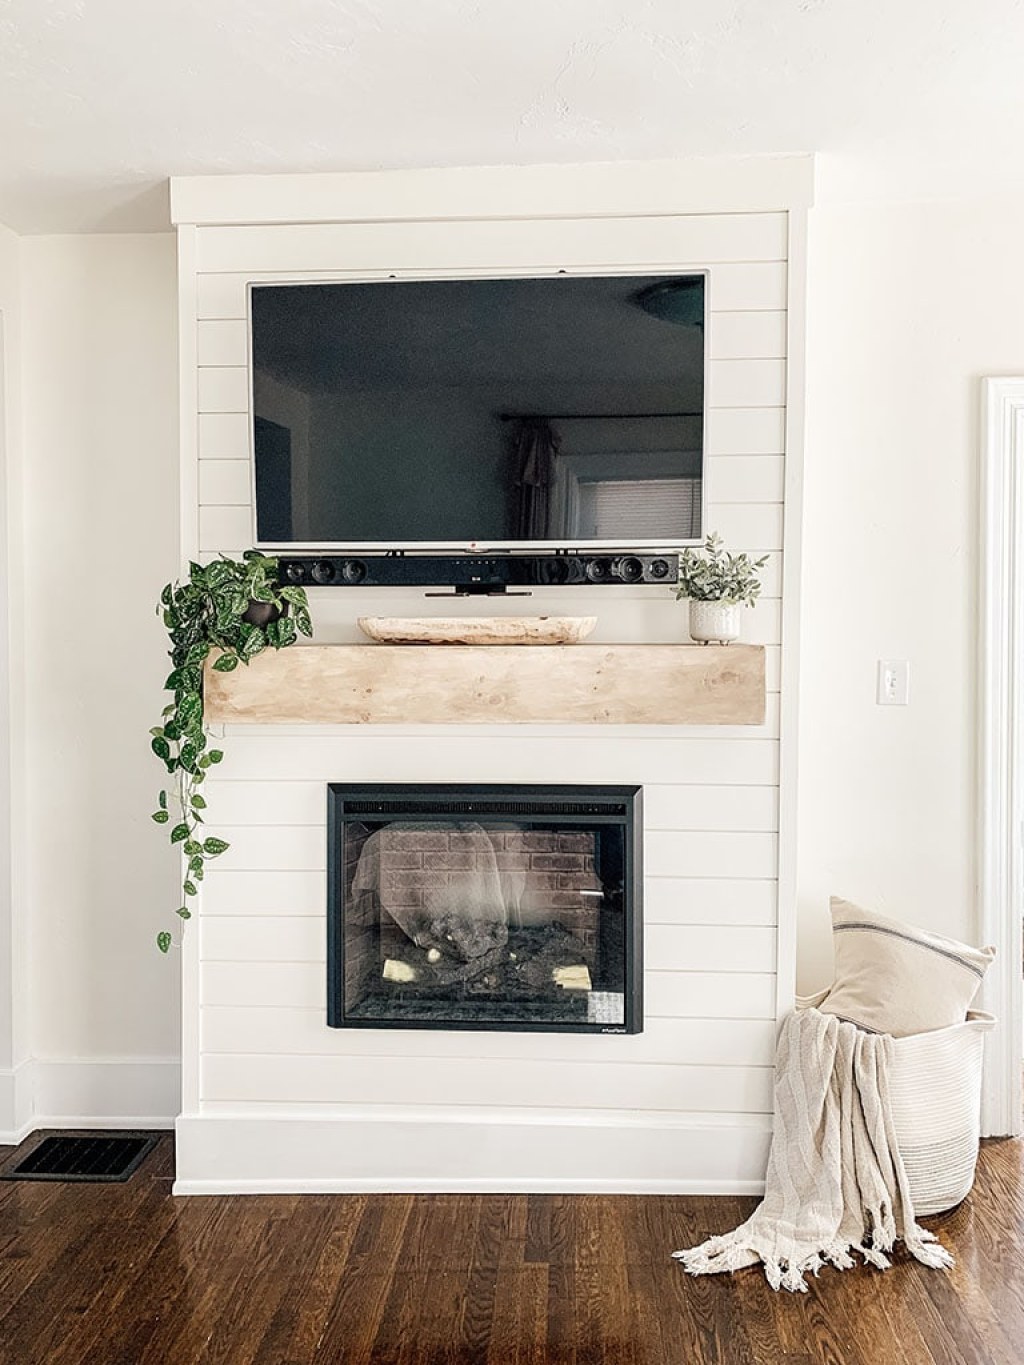 electric fireplace with shiplap surround - DIY Shiplap Electric Fireplace & Mantel - Micheala Diane Designs